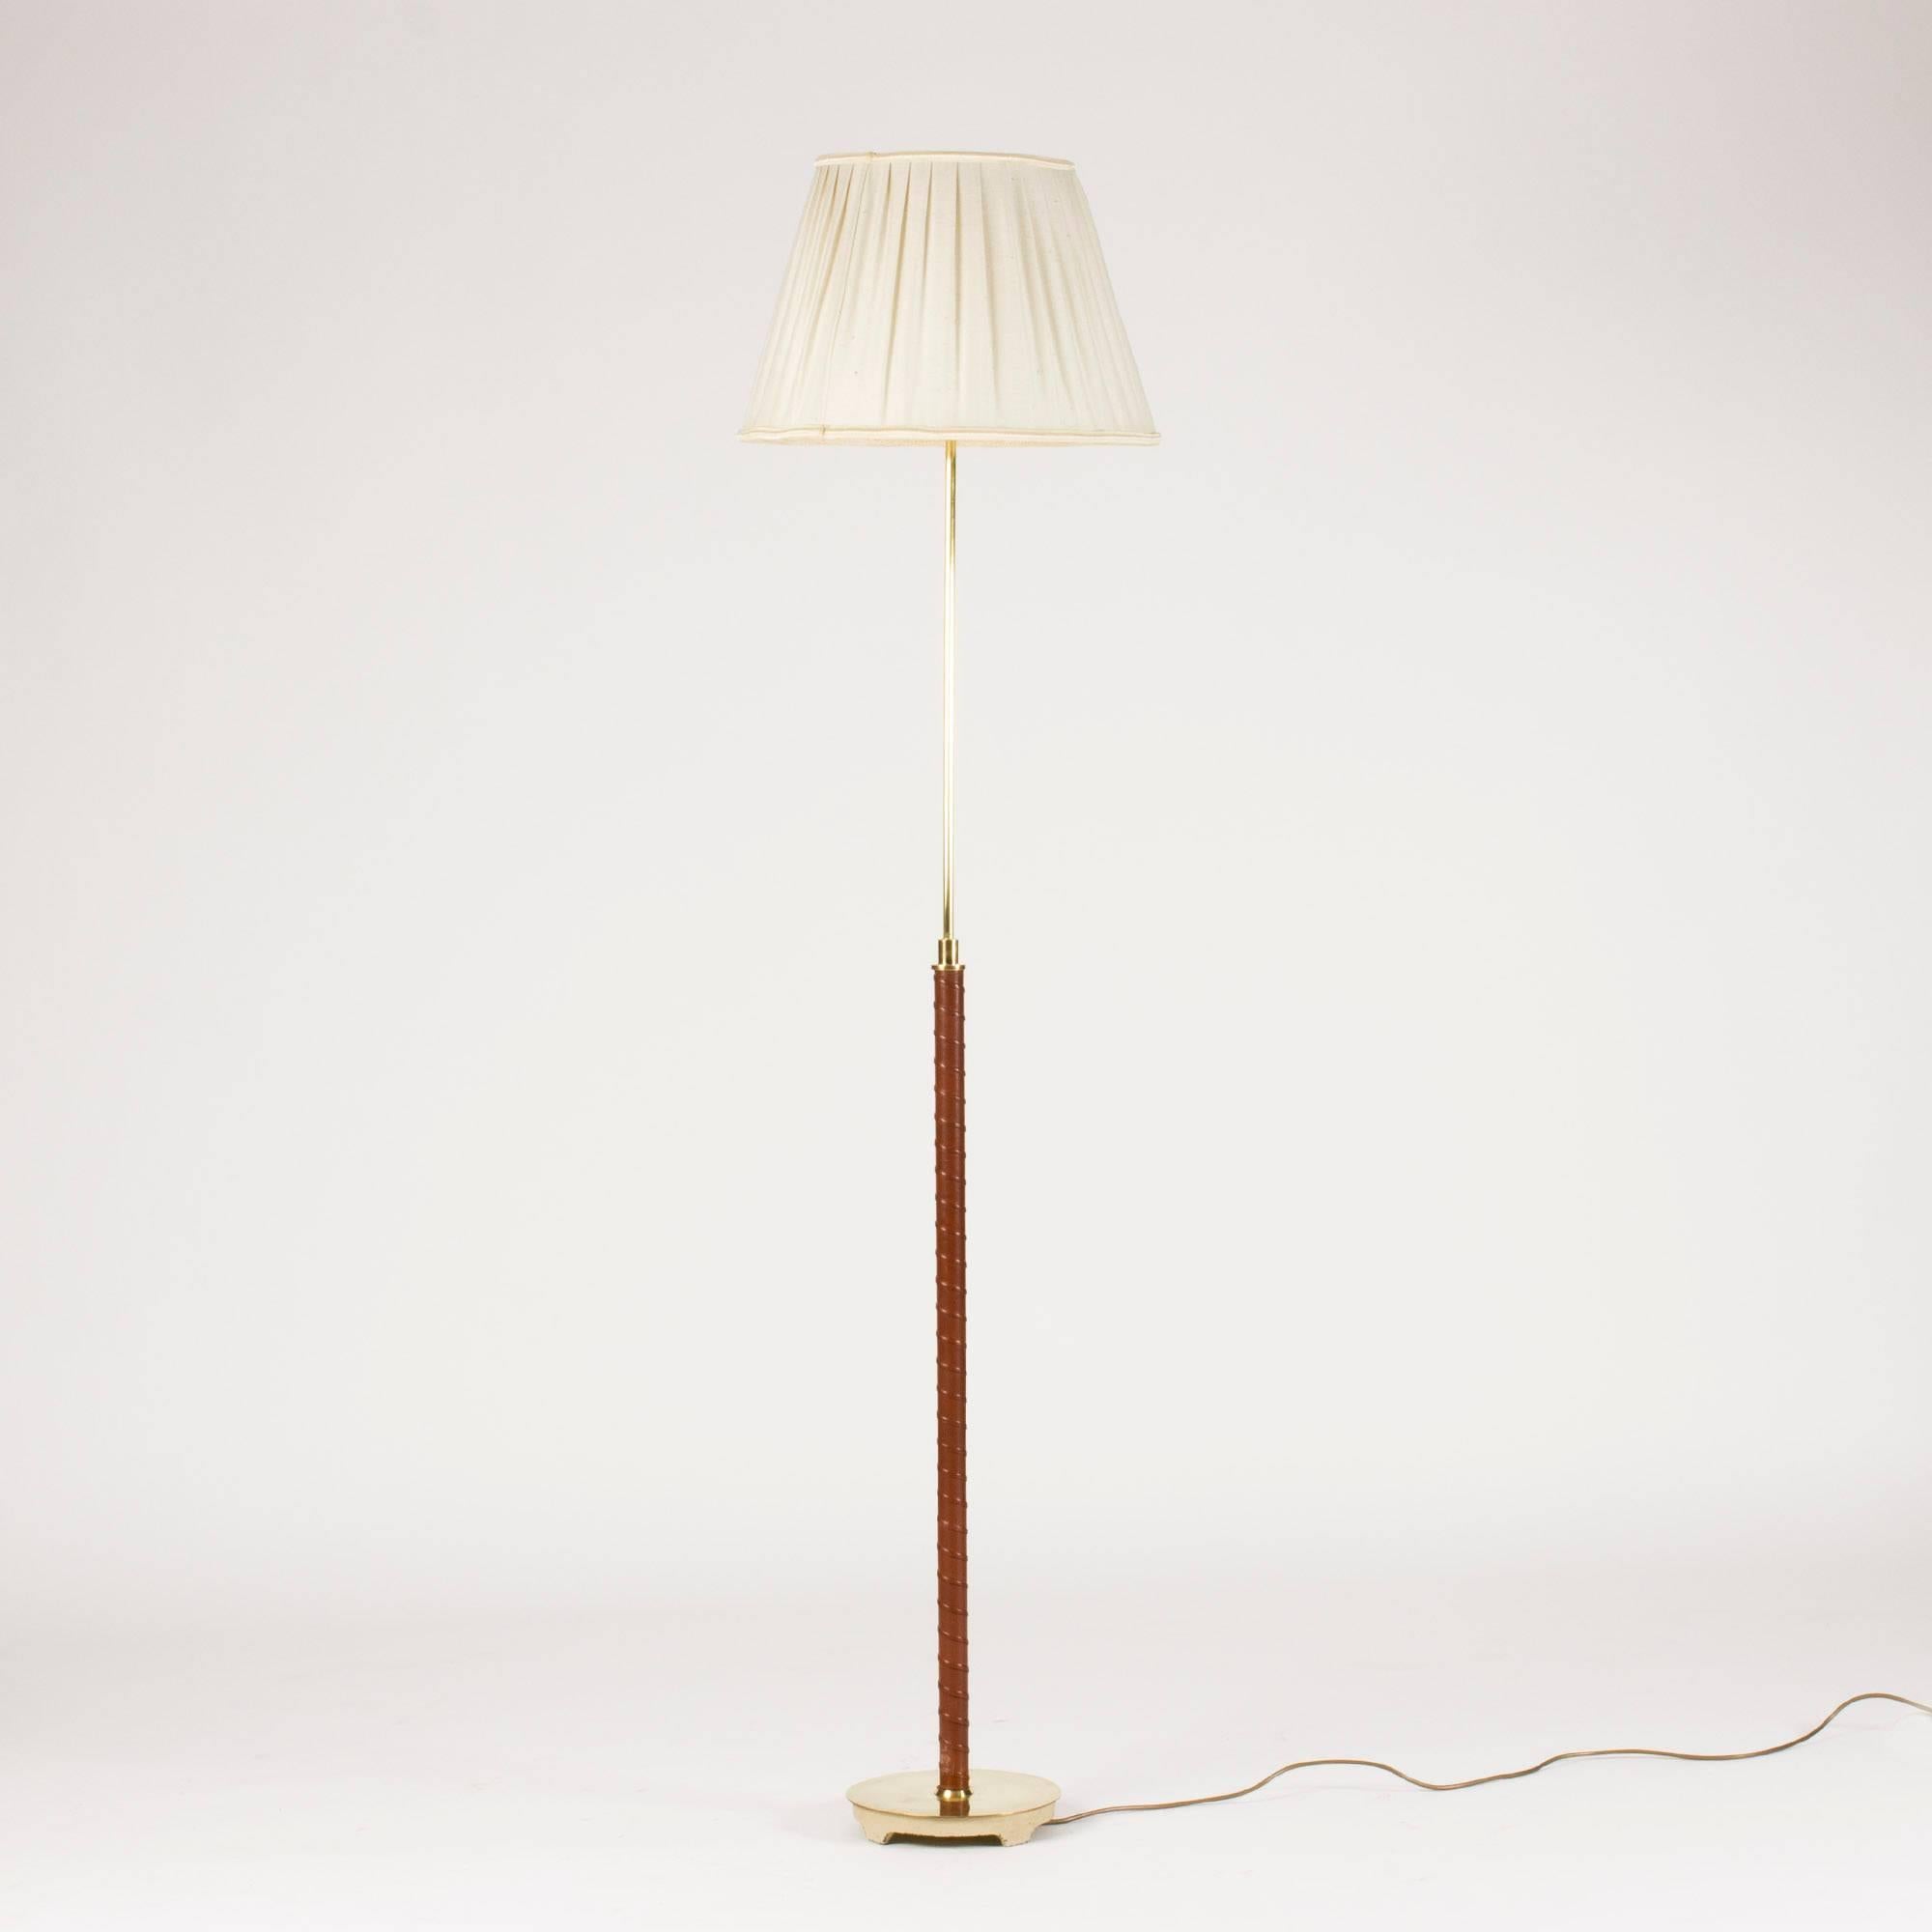 Elegant floor lamp from NK, with a brass base with sculpted feet and handle wound with brown leather. The height of the lamp is adjustable vertically. Original textile shade in good condition, somewhat yellowed.